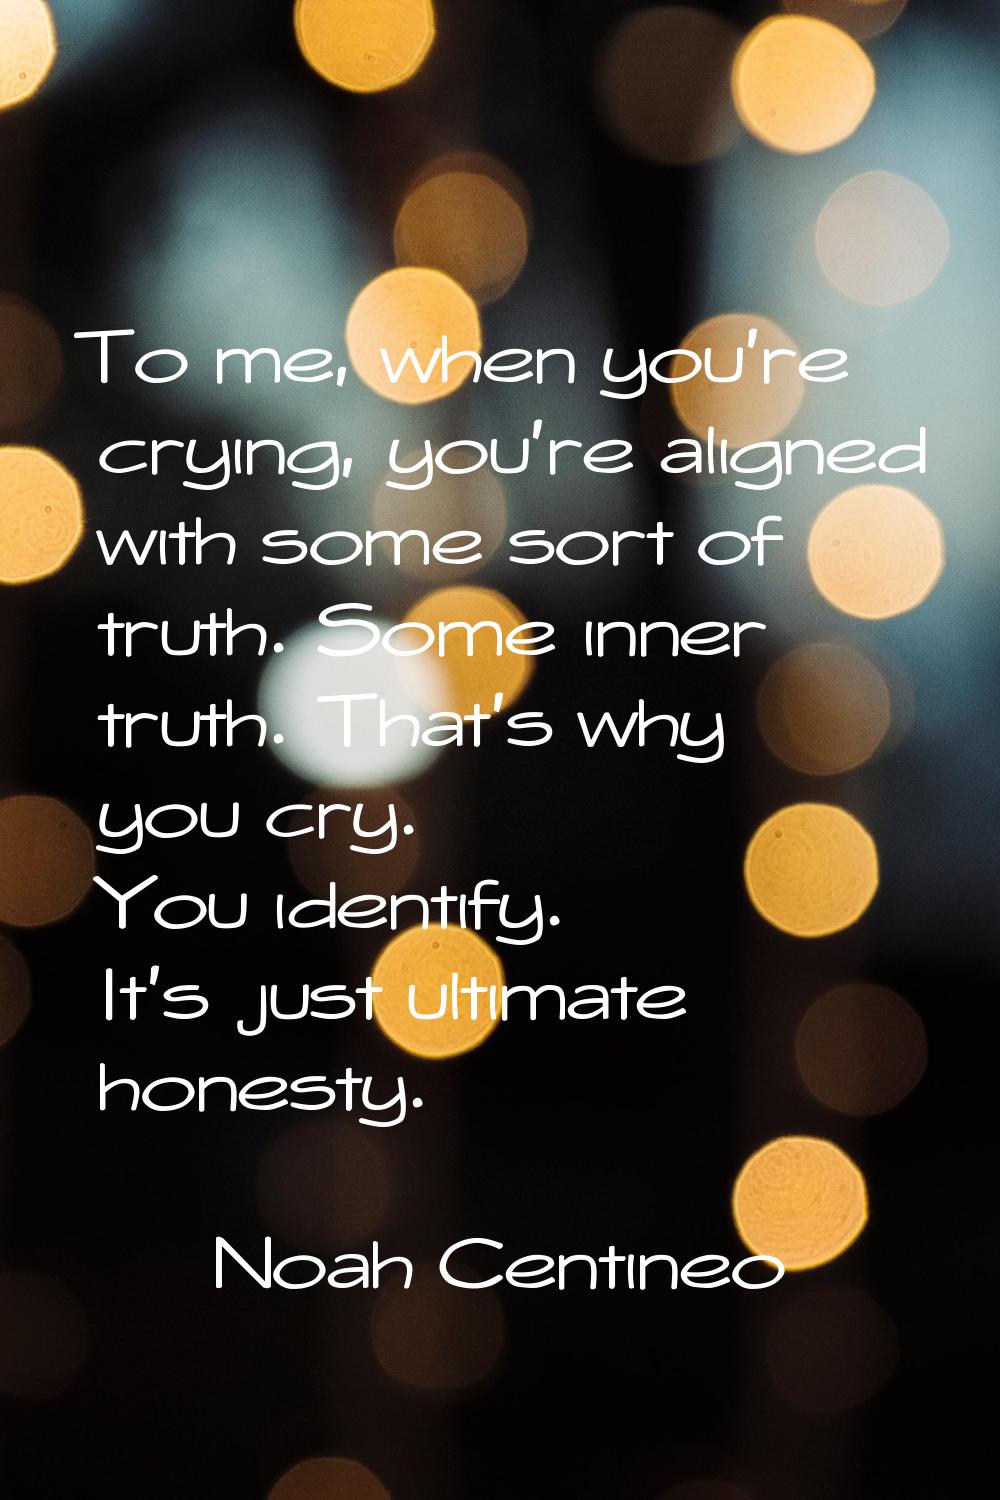 To me, when you're crying, you're aligned with some sort of truth. Some inner truth. That's why you